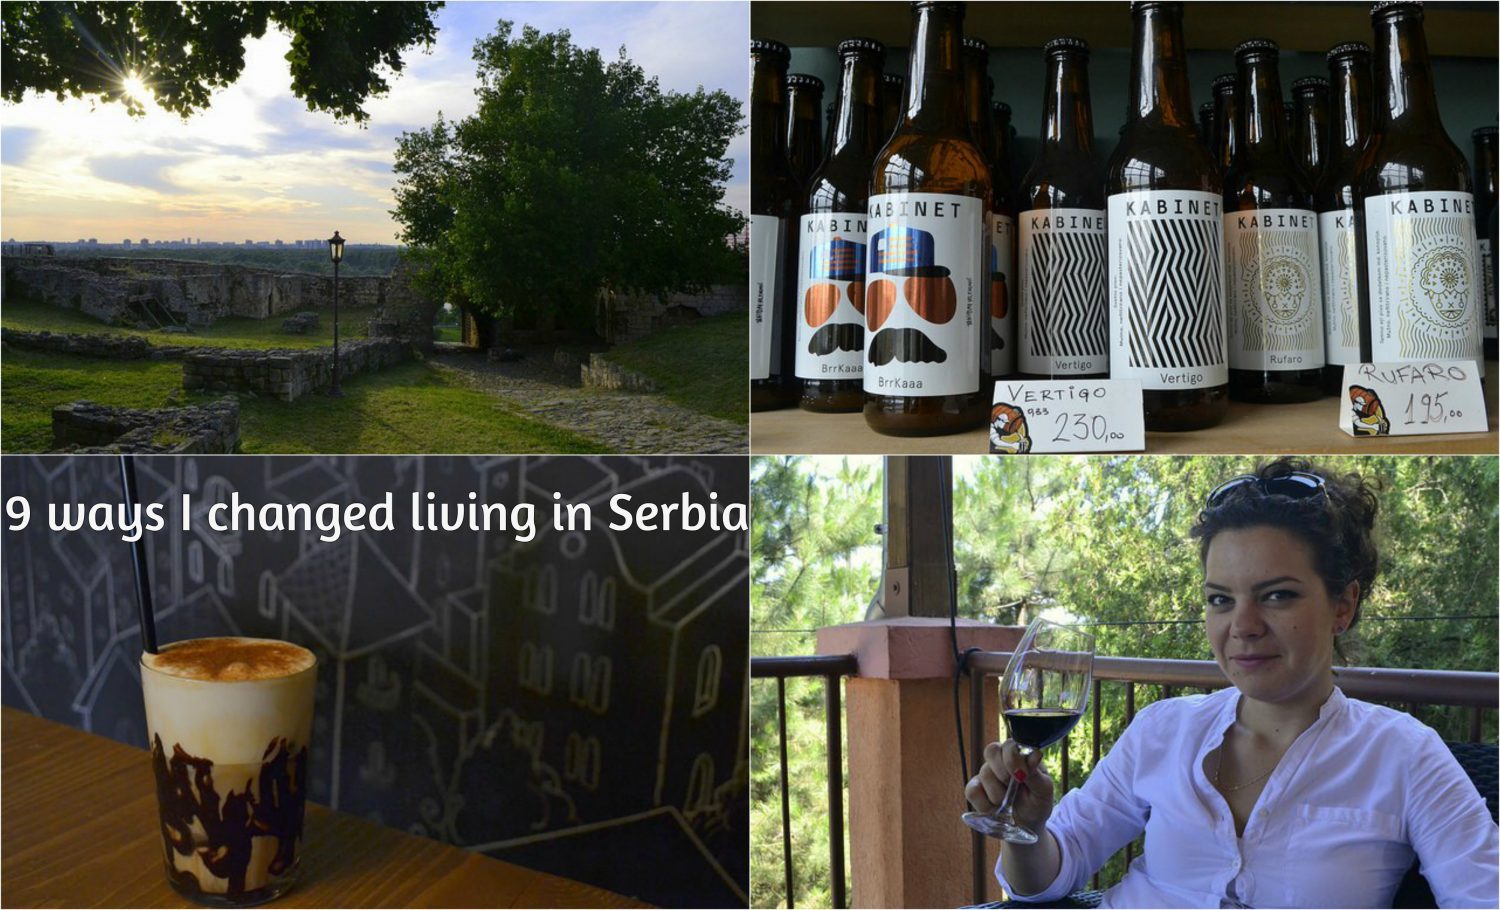 Living in Serbia